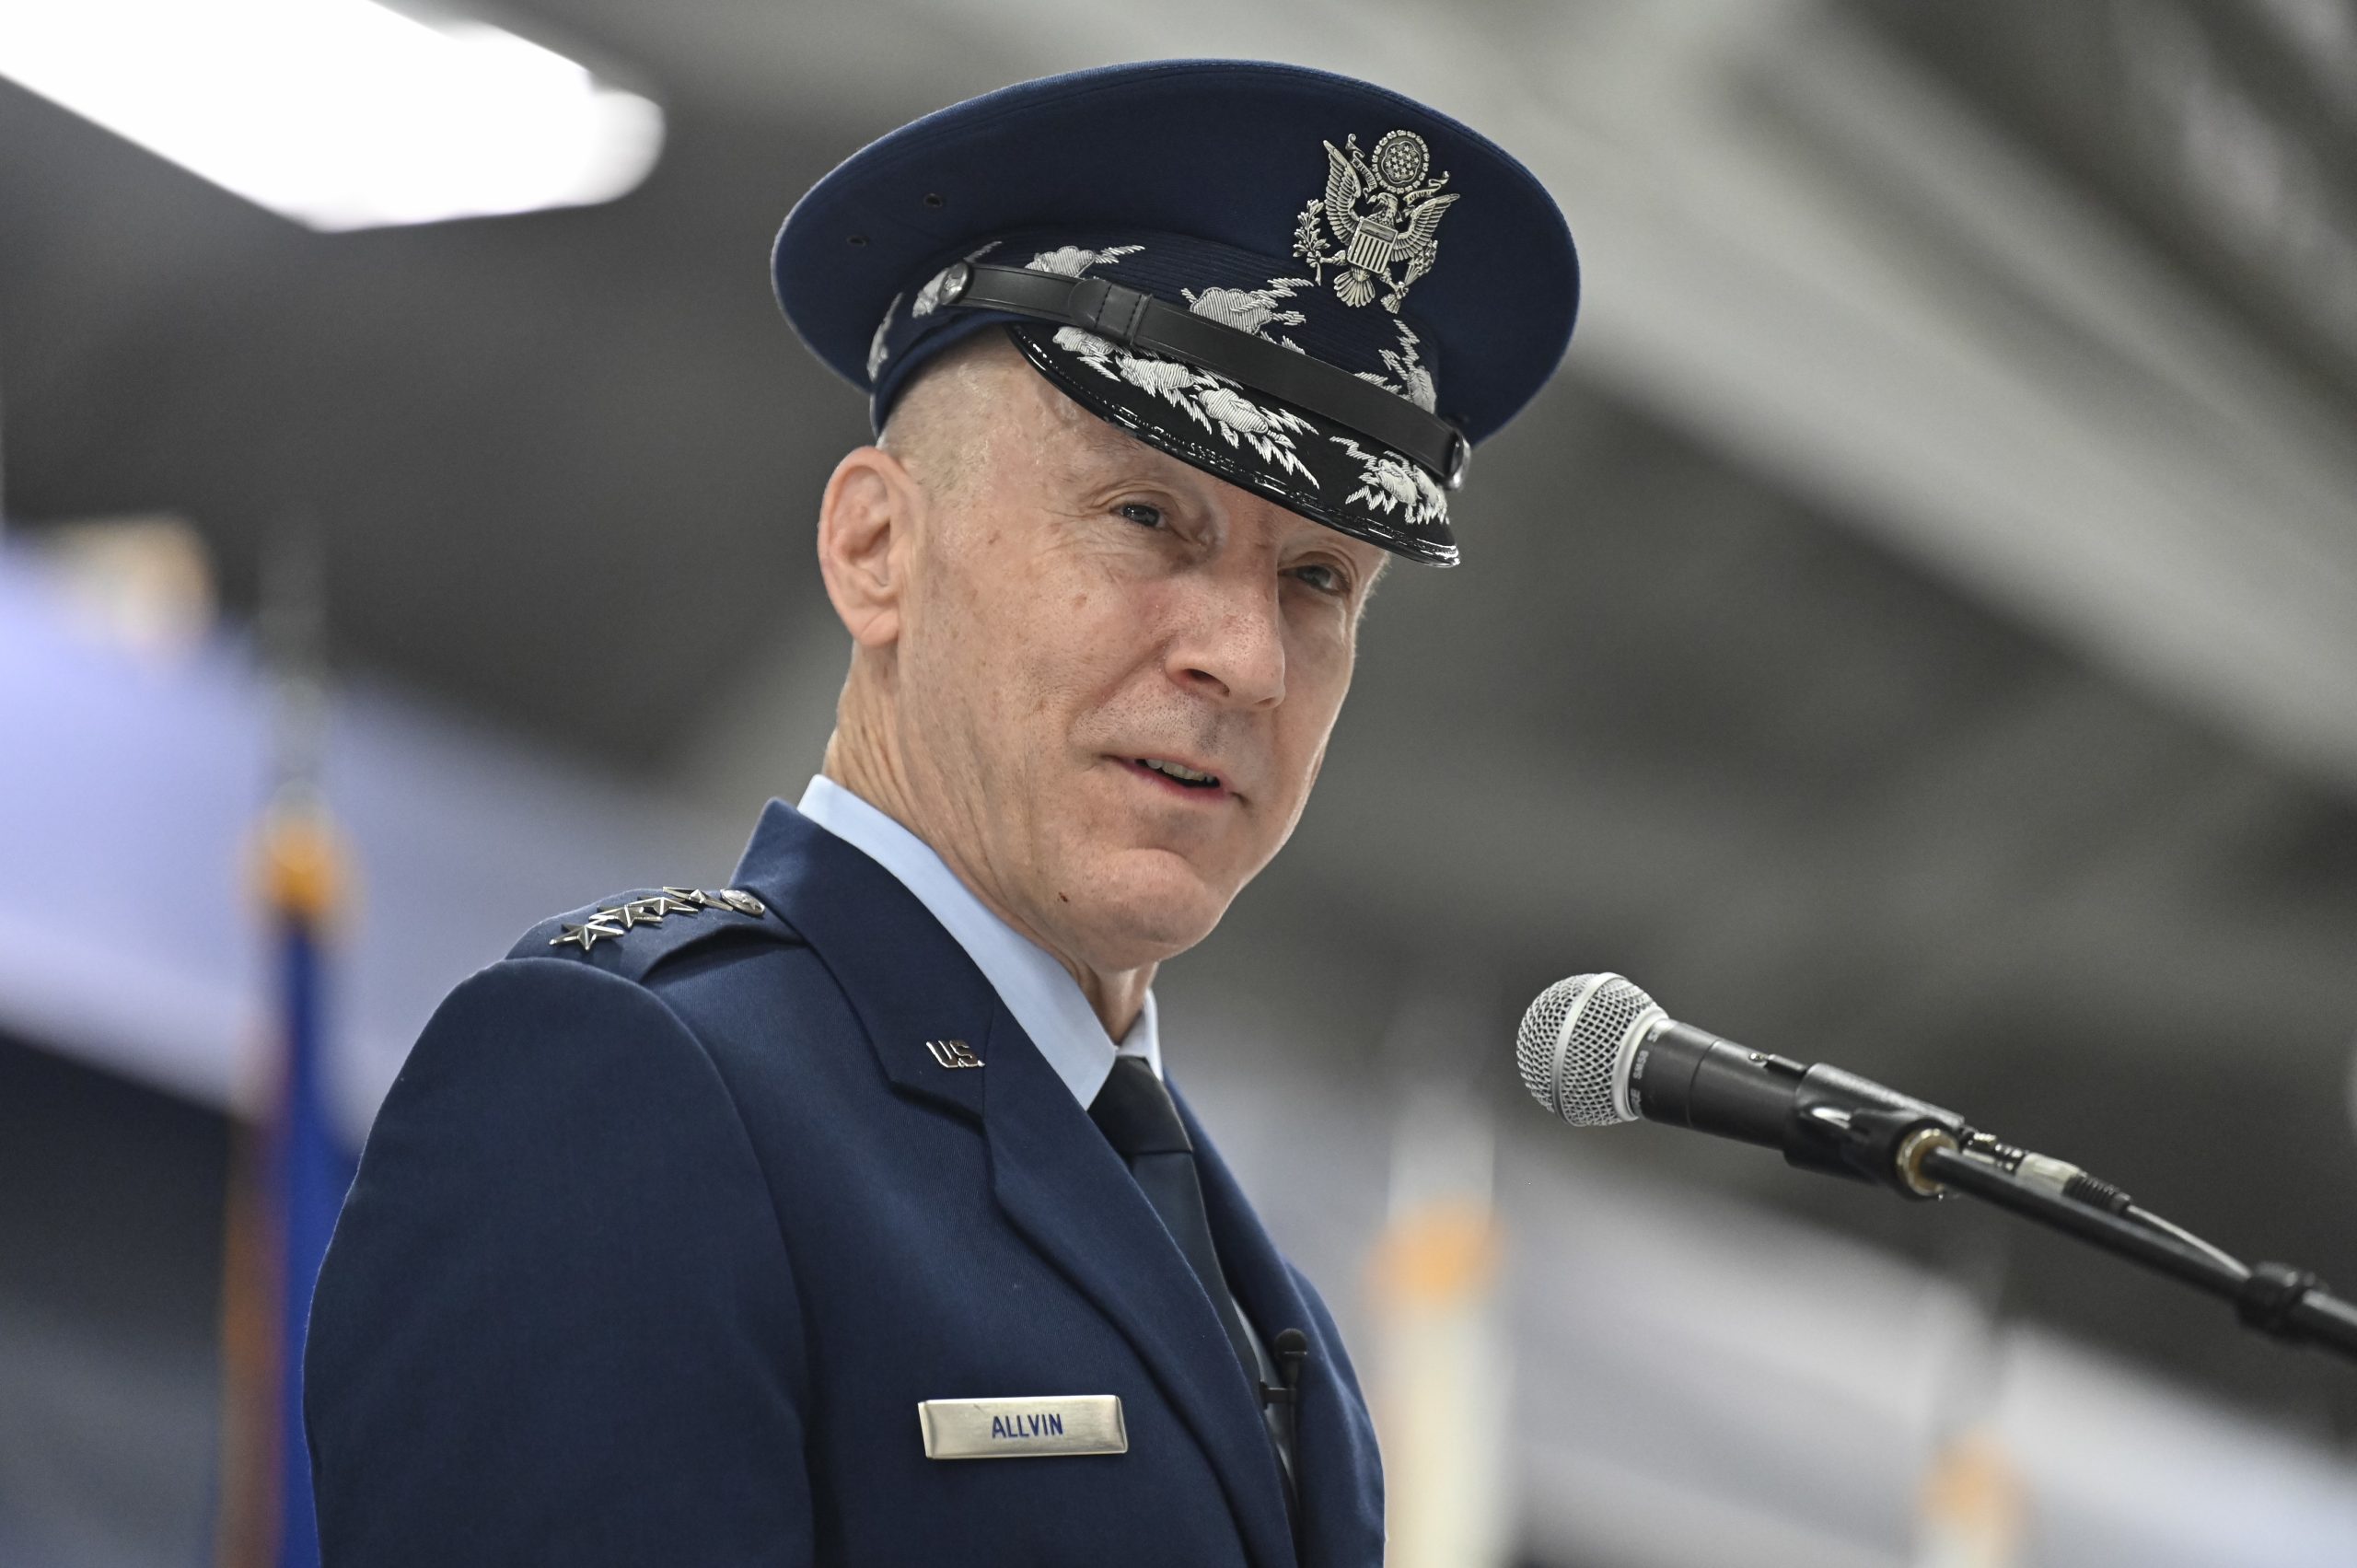 In First Speech as Chief, Allvin Touts ‘DNA’ of Airpower in Responding to Pacing Challenge